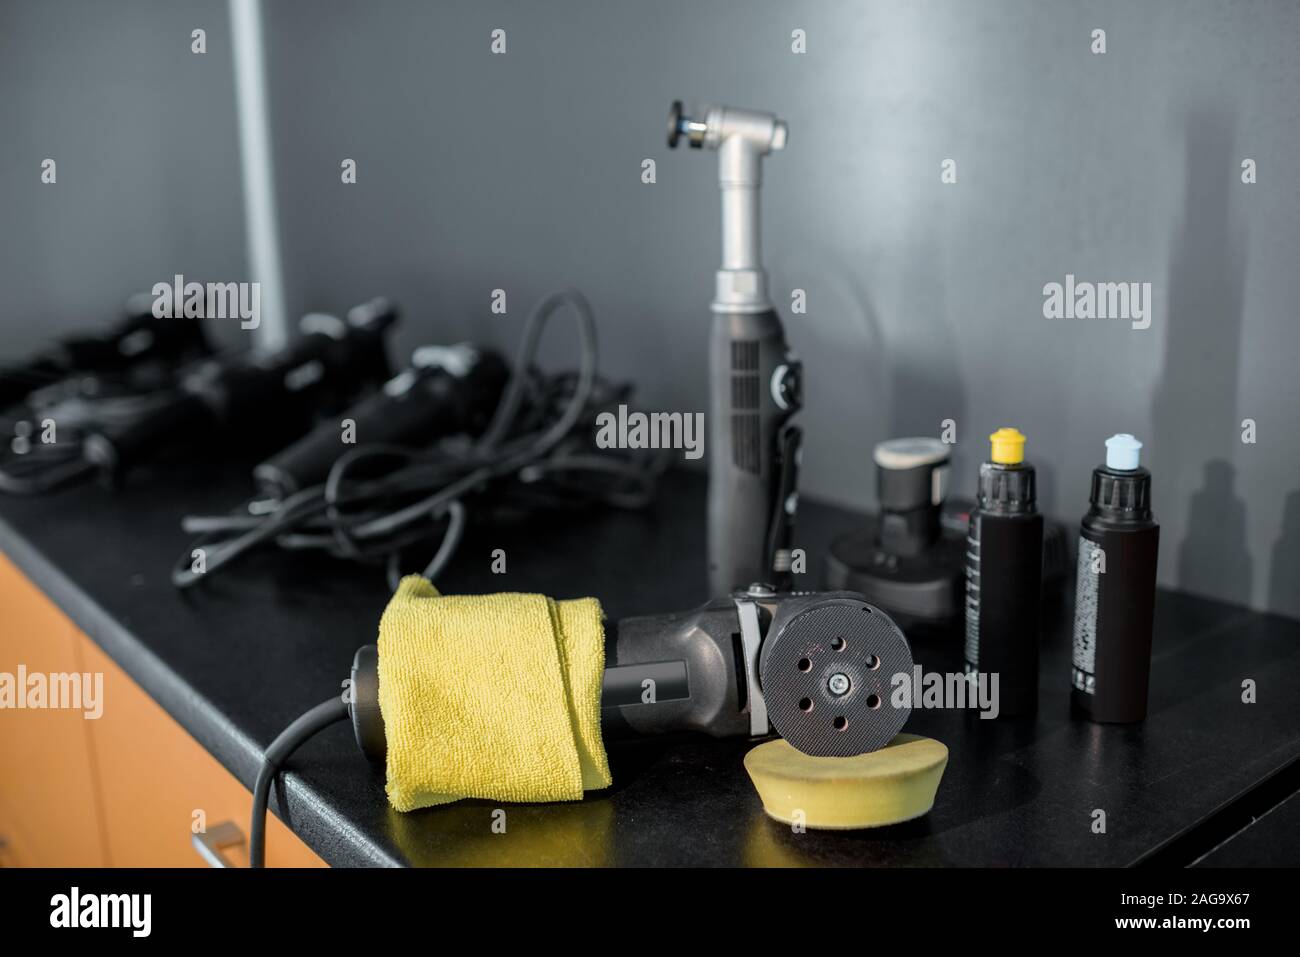 Professional equipment for automotive body polishing on the table at the car service. Car detailing tools for vehicle care Stock Photo